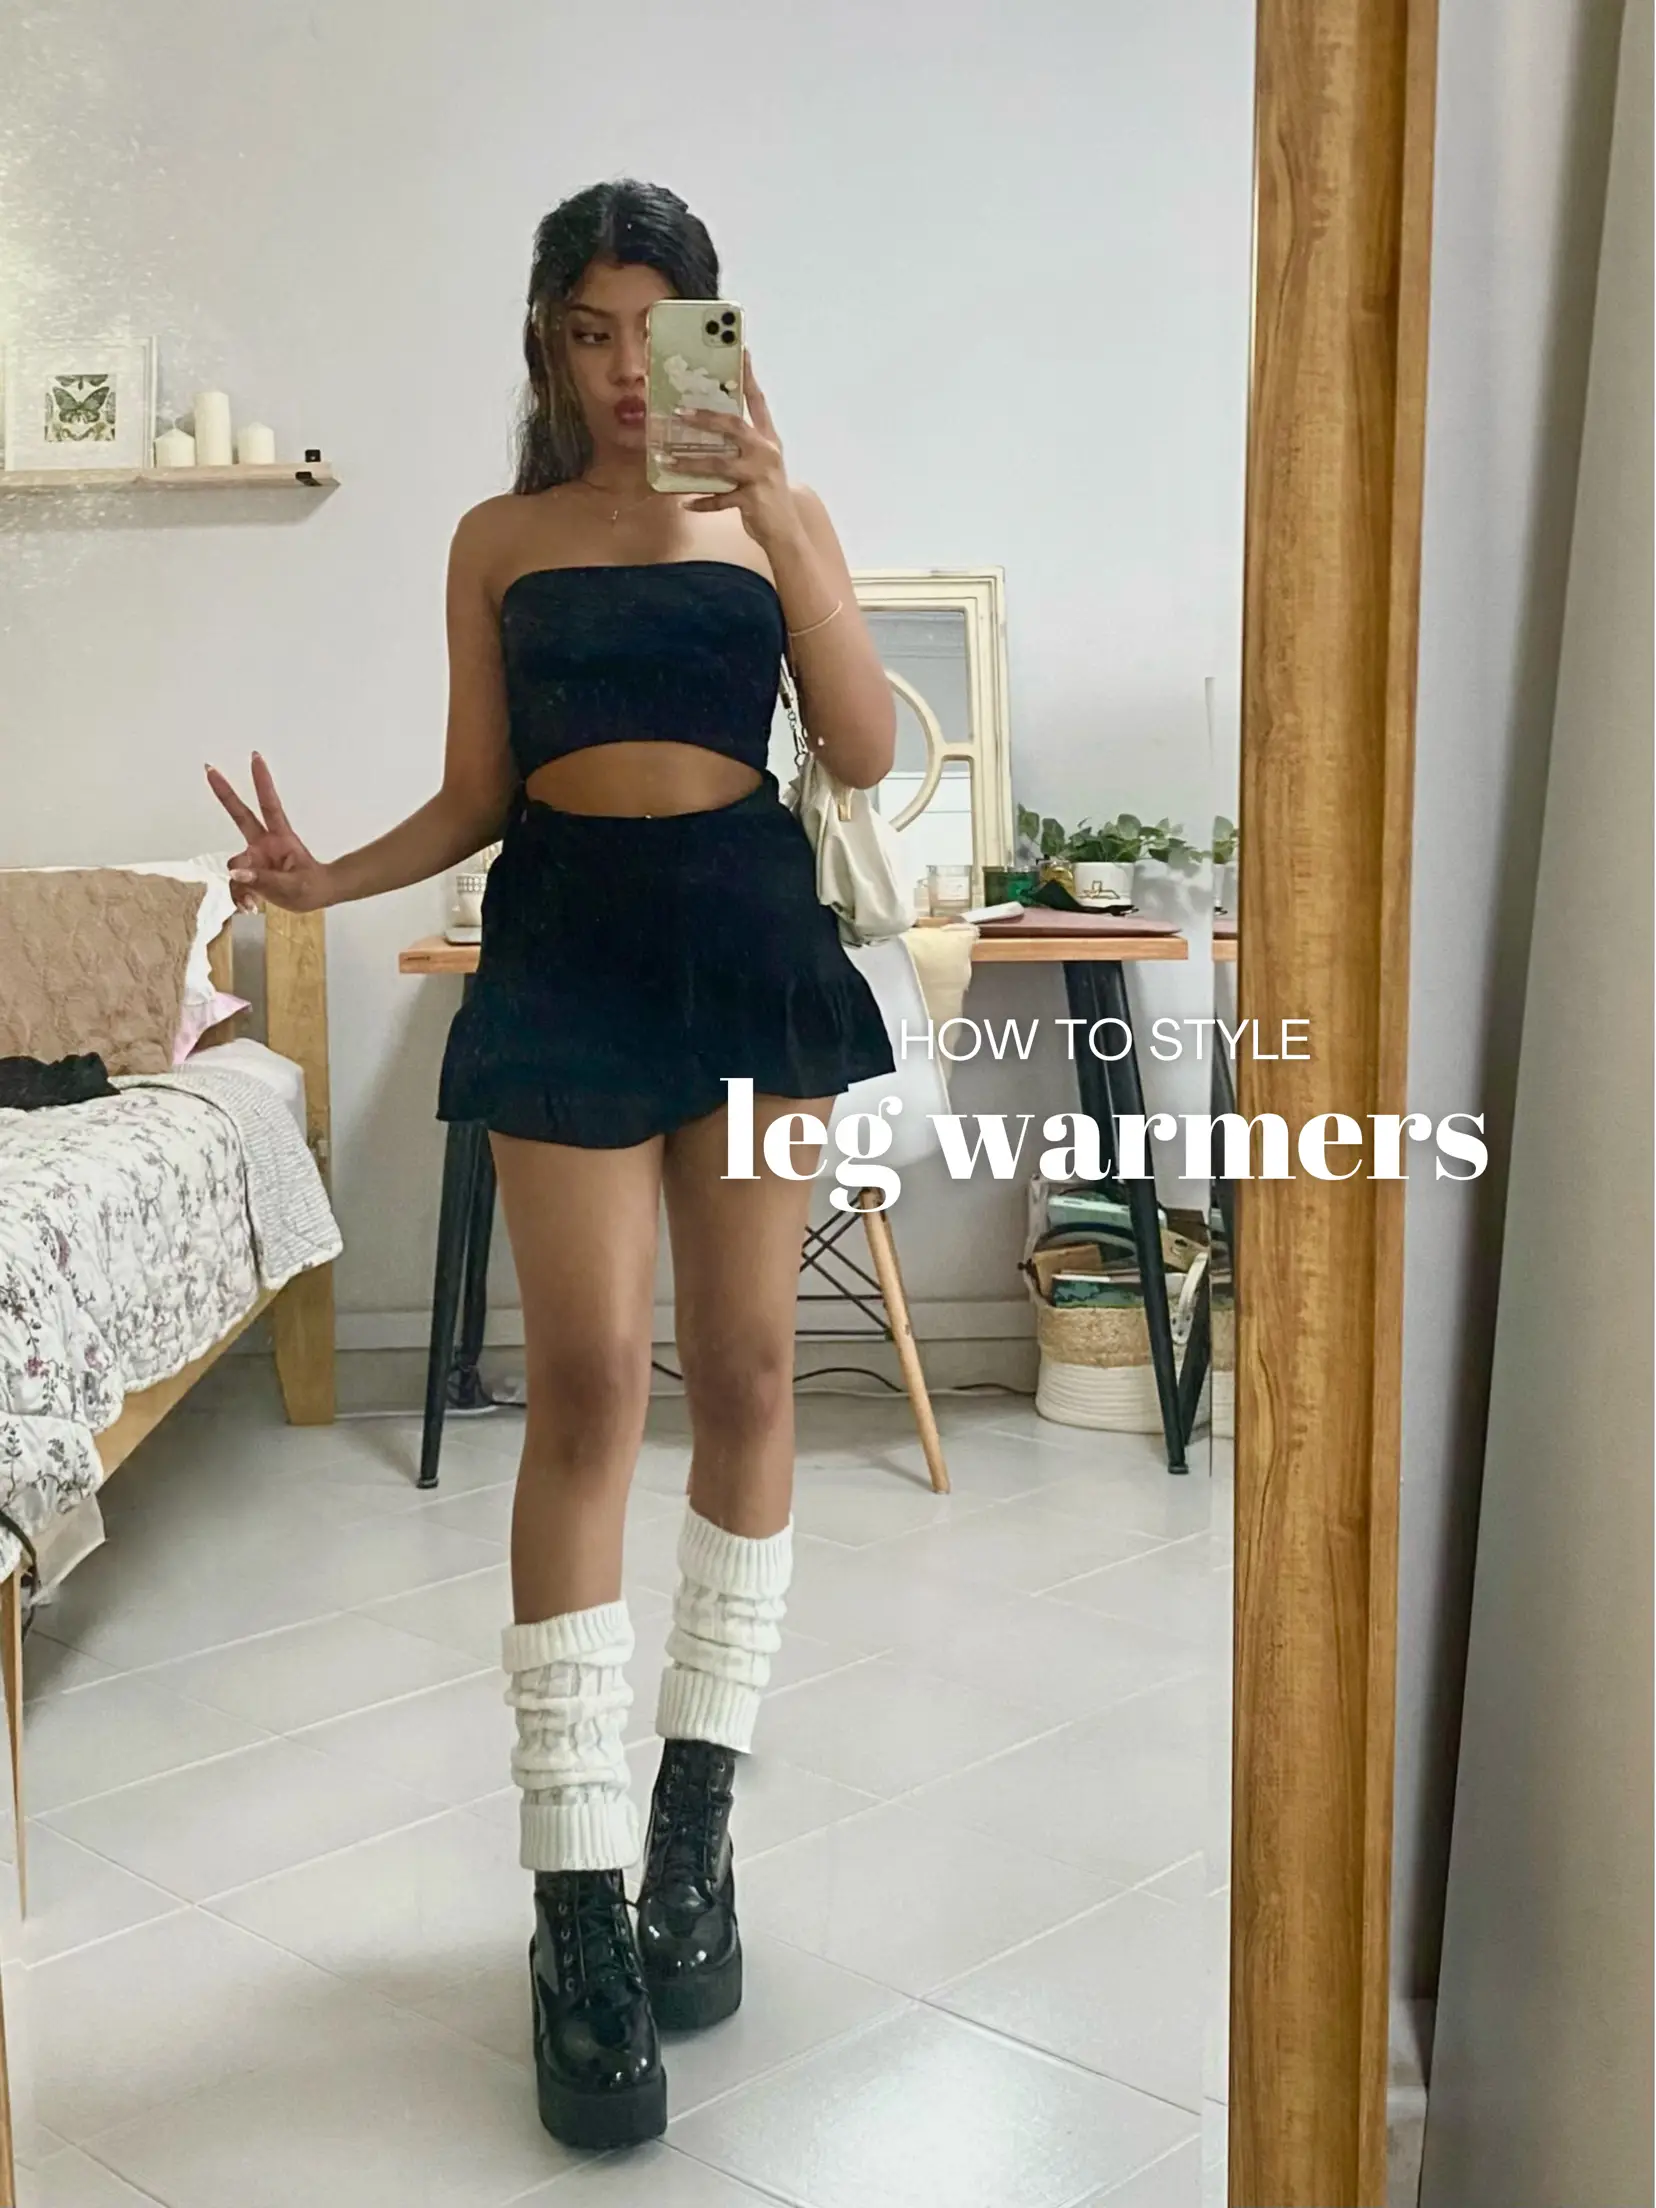 How to style leg warmers | Gallery posted by sandraclaire | Lemon8